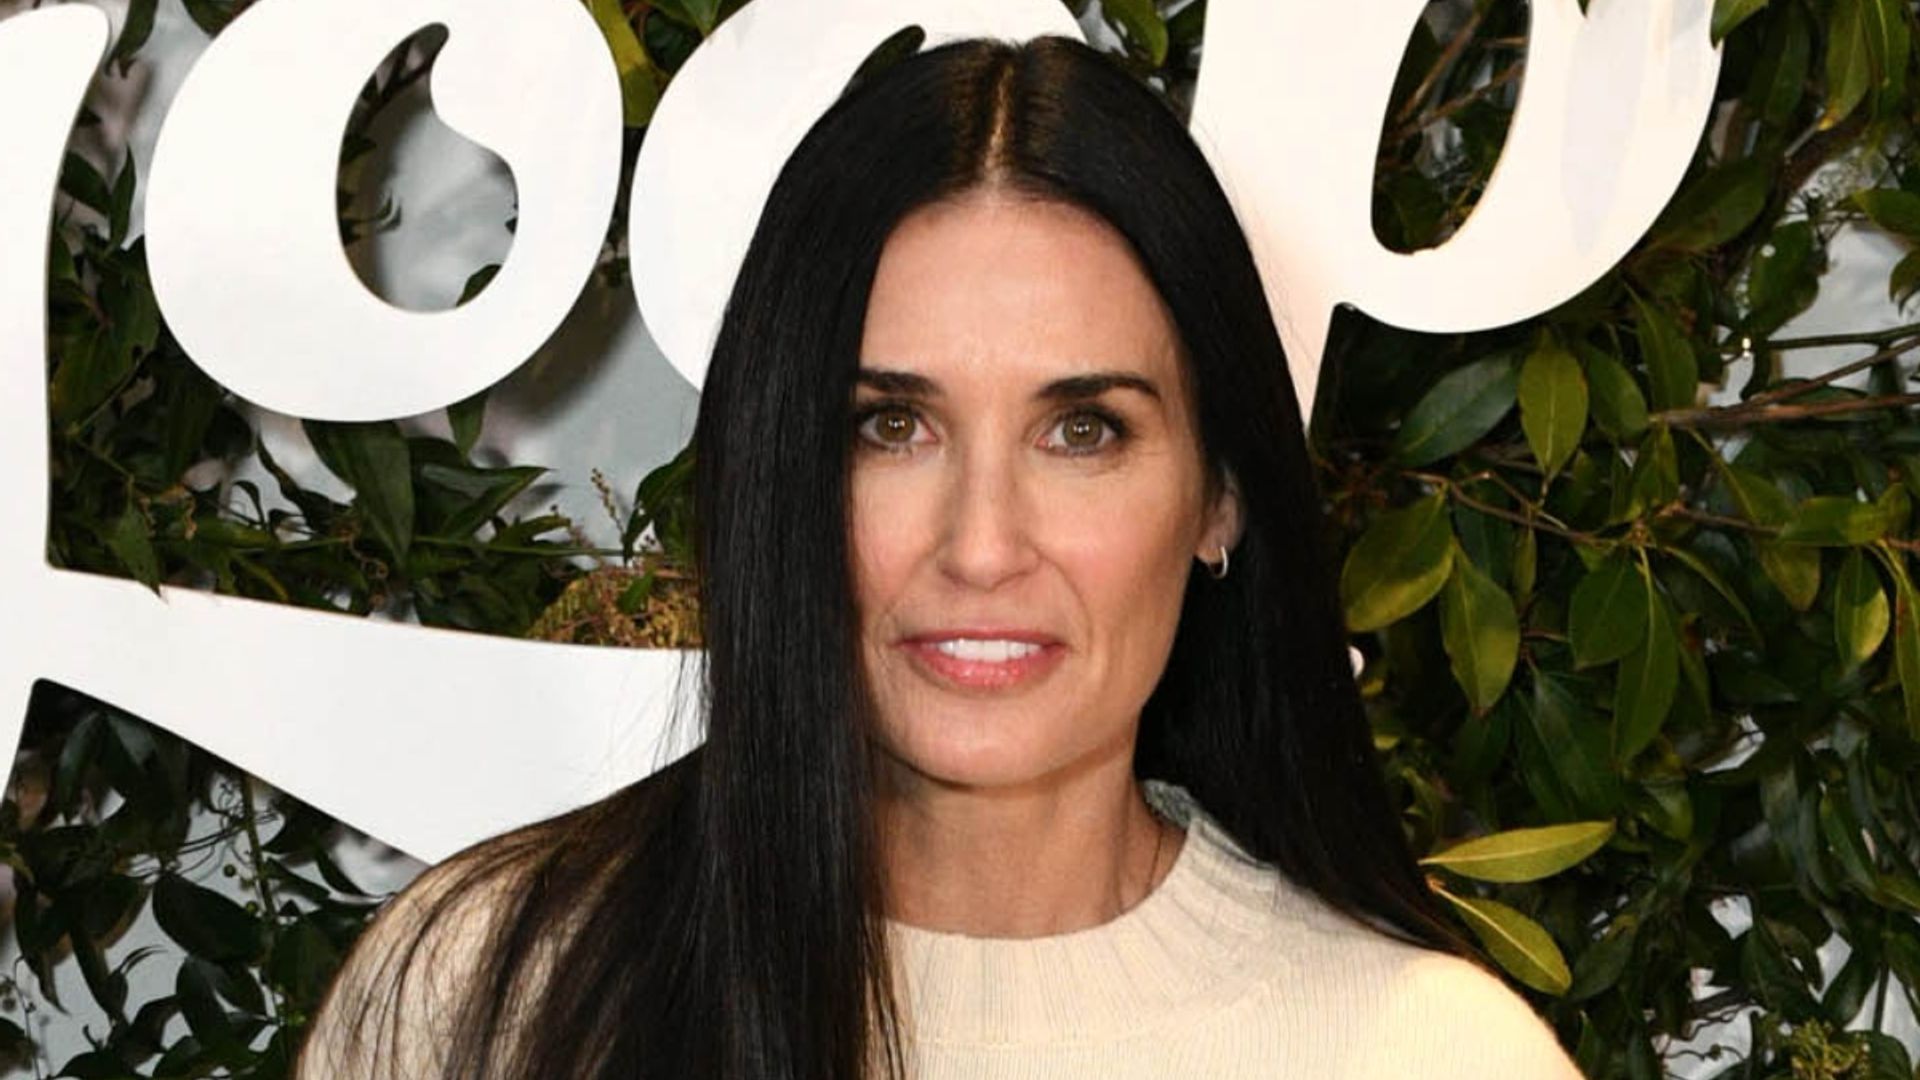 Demi Moore turns heads with her style in eye-catching new photos